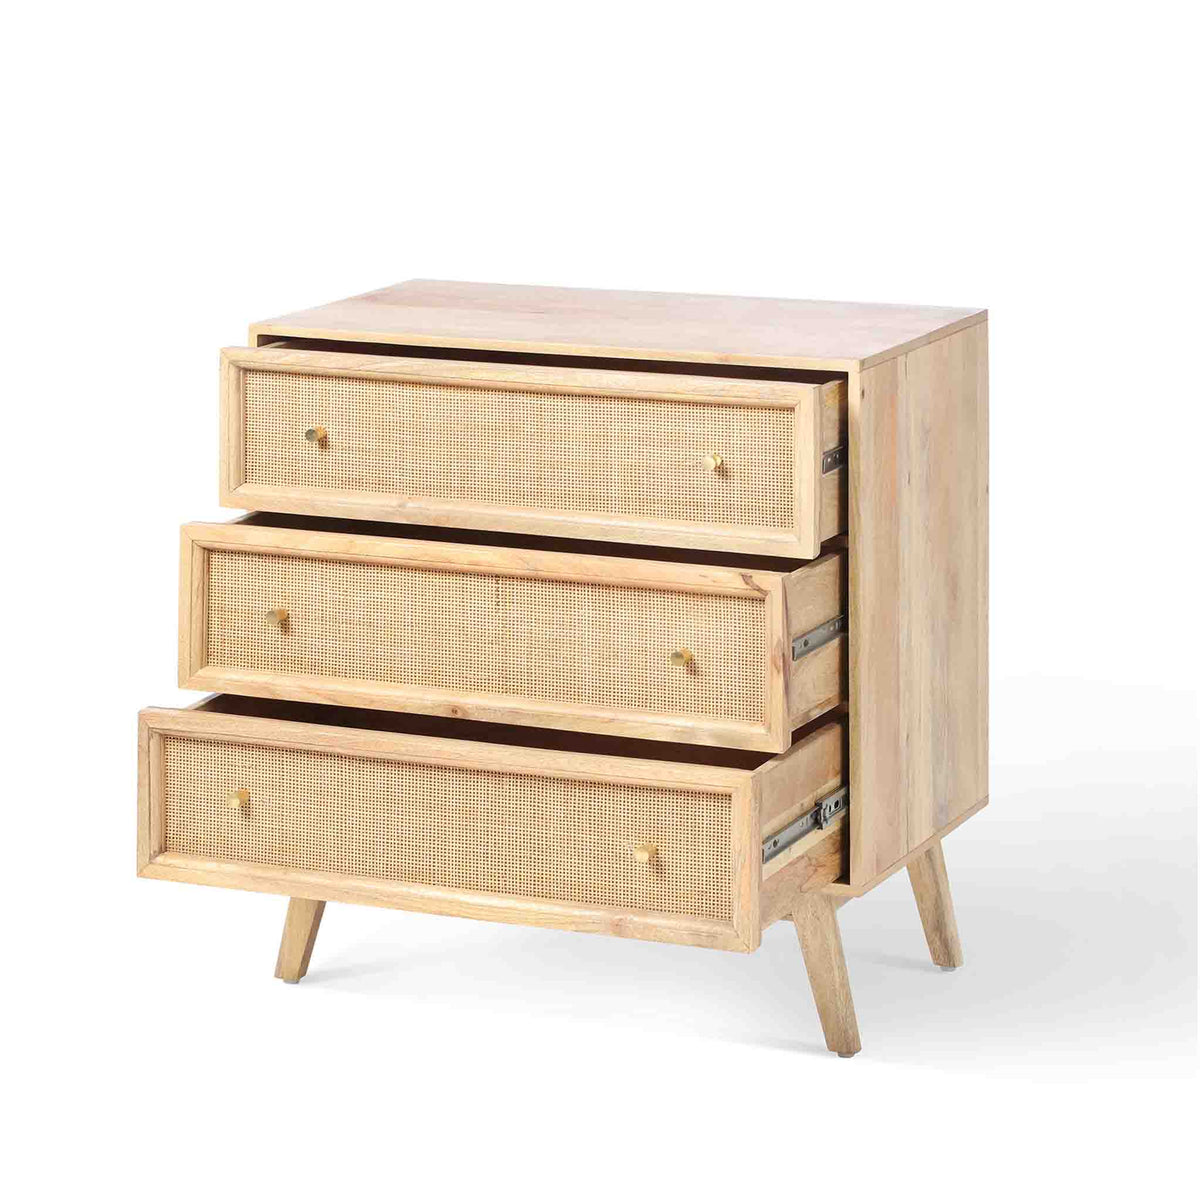 Venti Natural Mango Wood & Cane Compact Chest of 3 Drawers